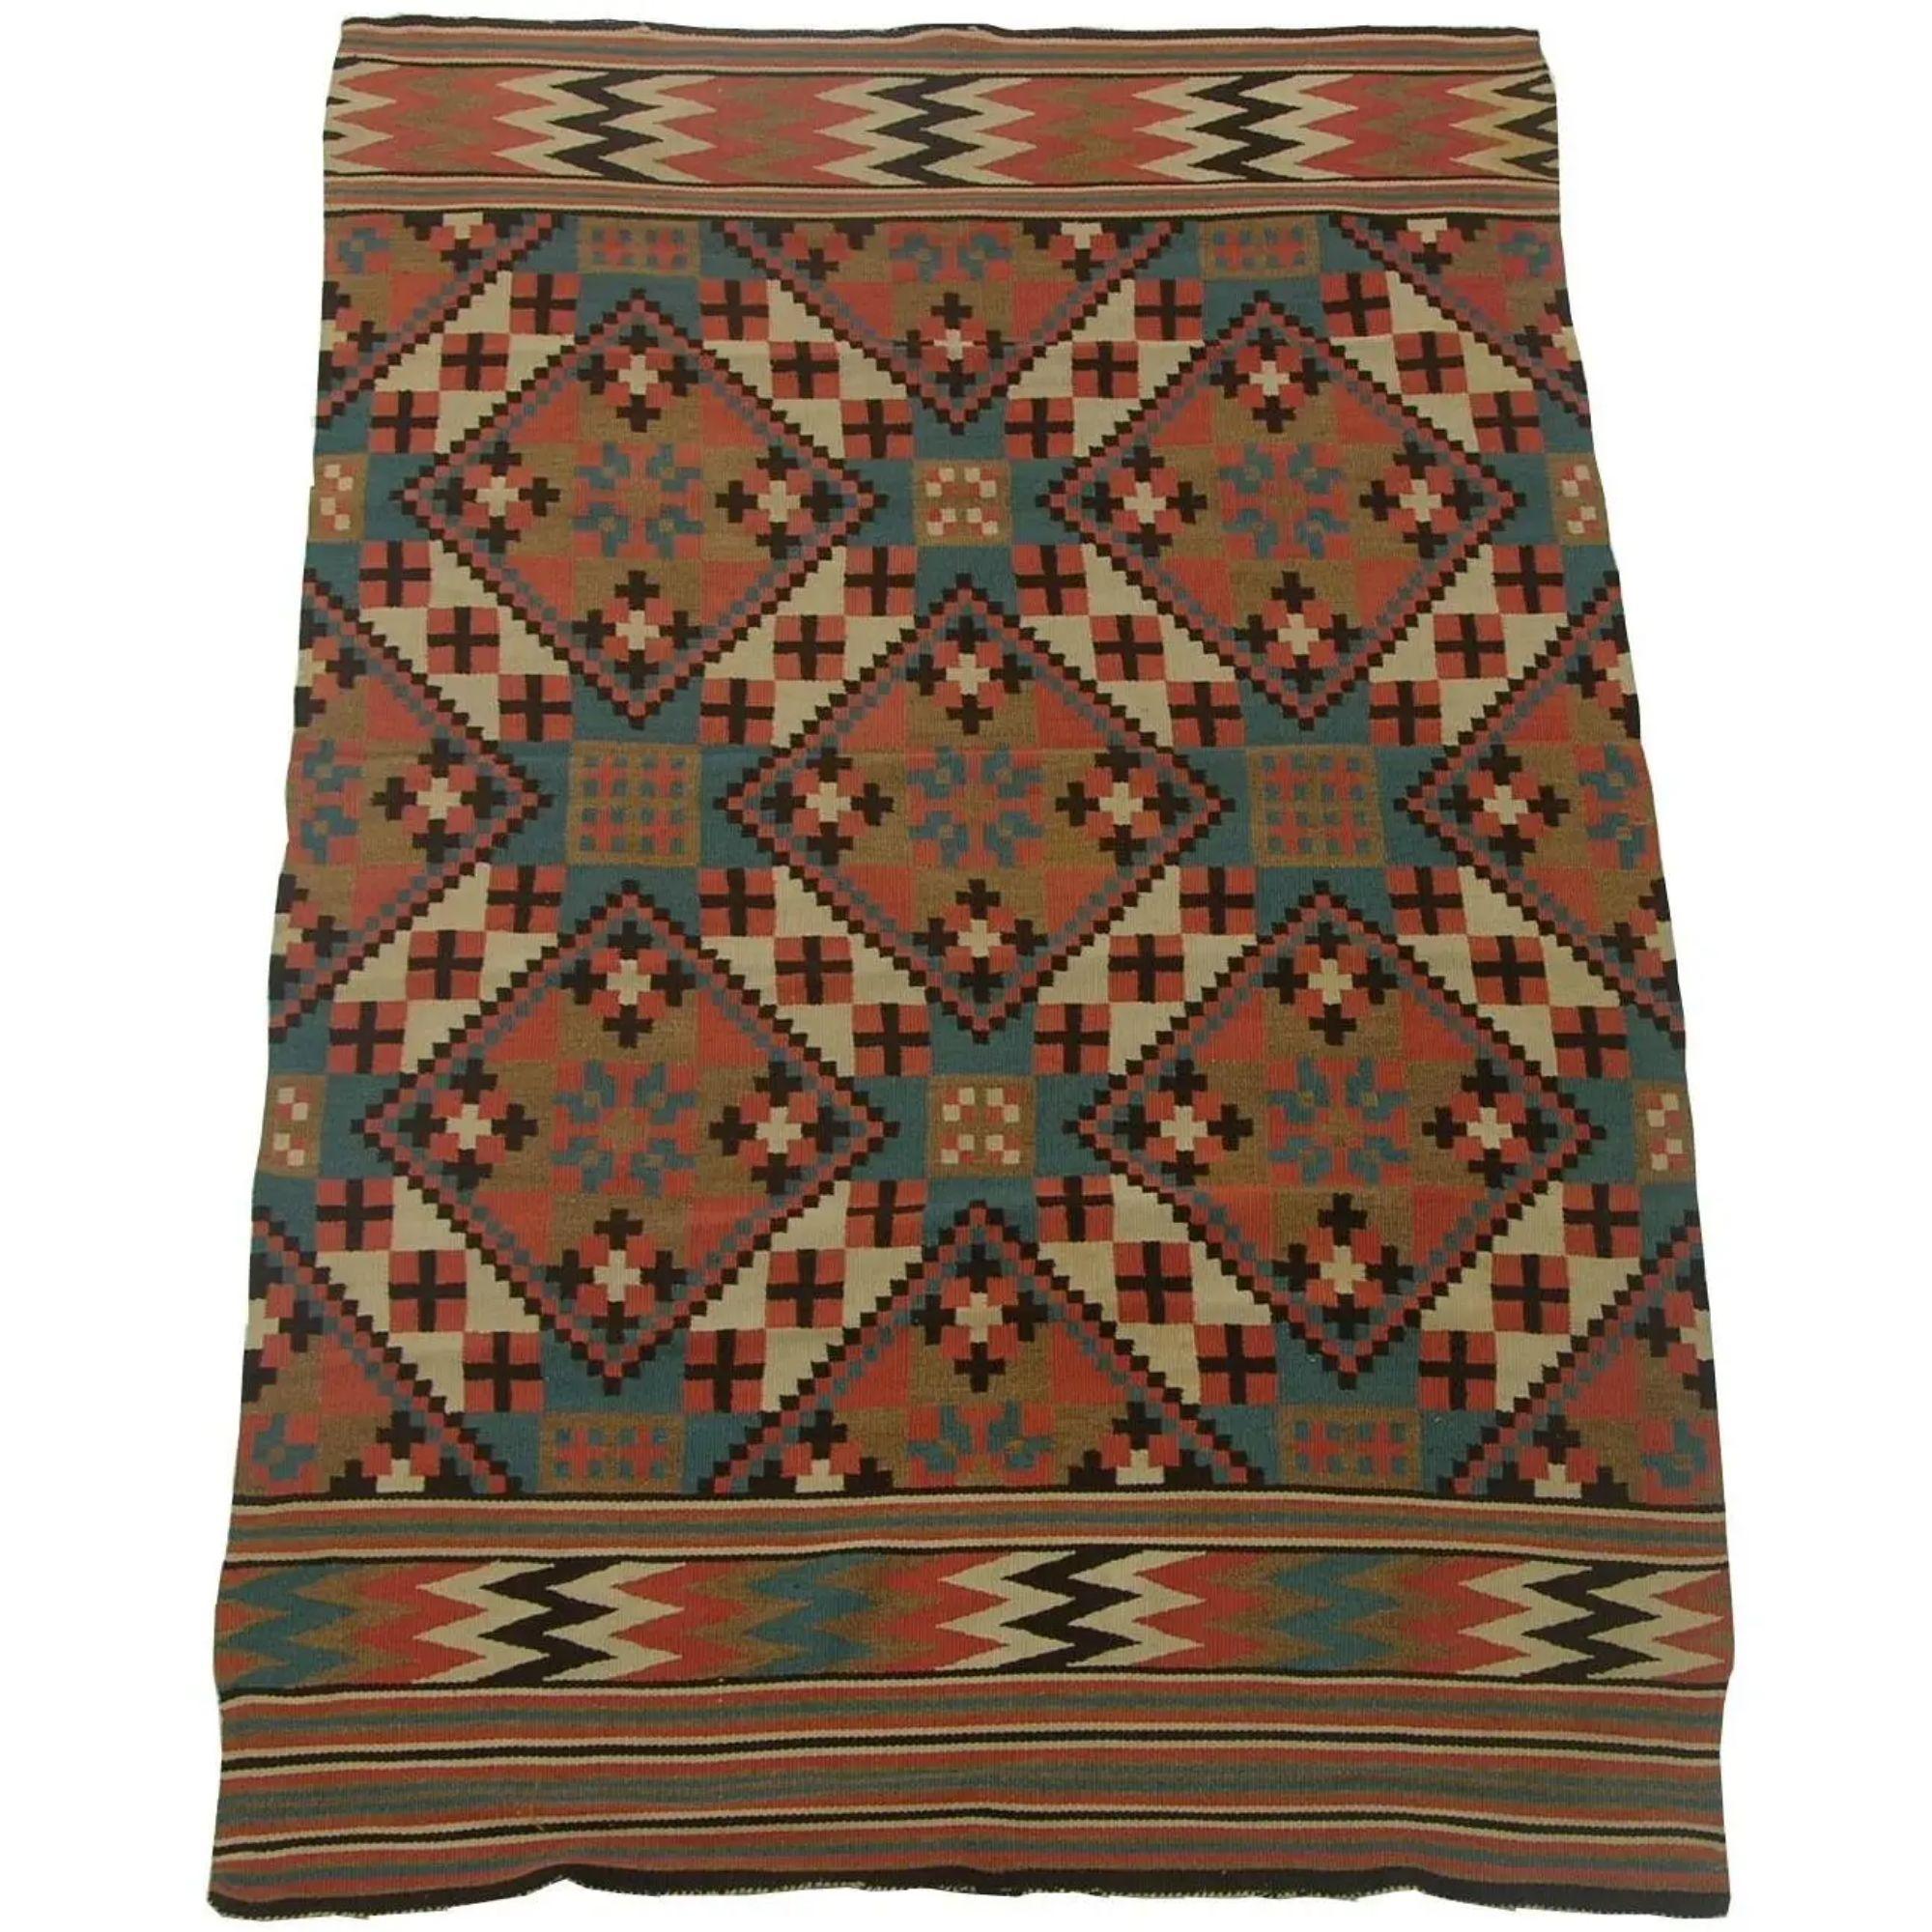 Early 20th Century Antique Geometric Kilim Runner Rug - 5'10'' X 3'8'' For Sale